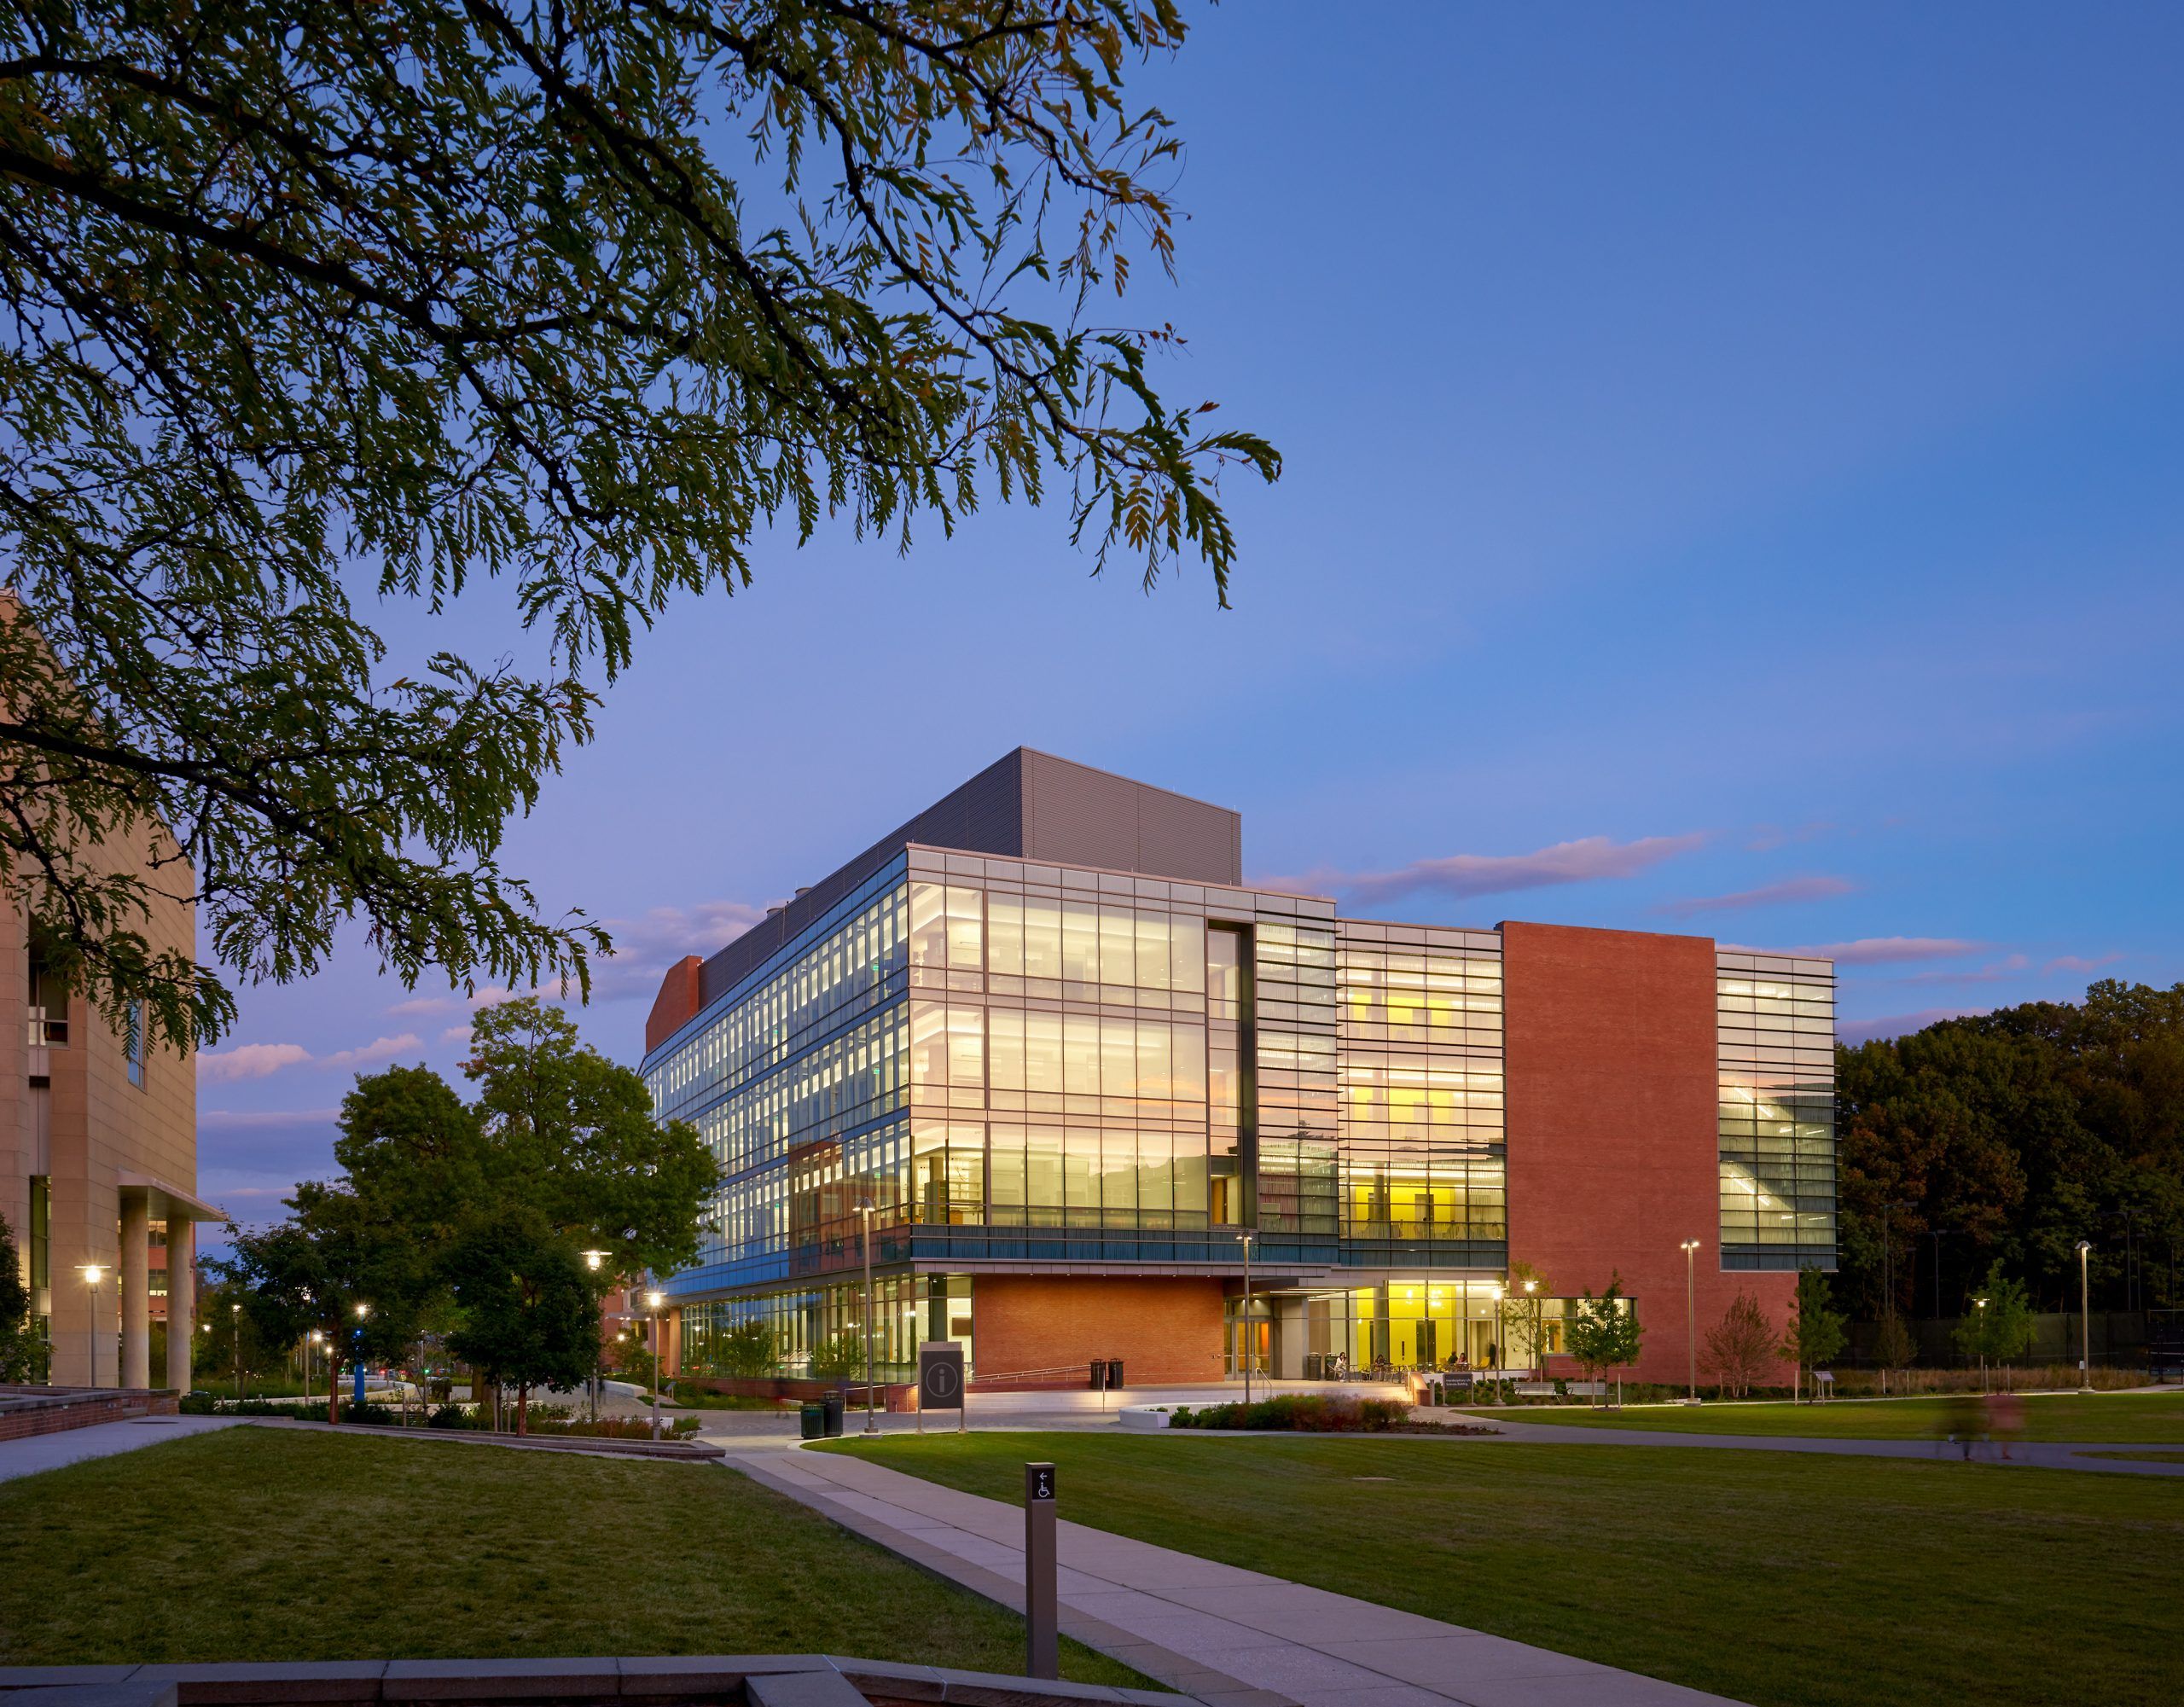 Exterior shot of the ISLB at dusk, with windows lit and a pathway leading calmly up to its main campus entrance across the student green